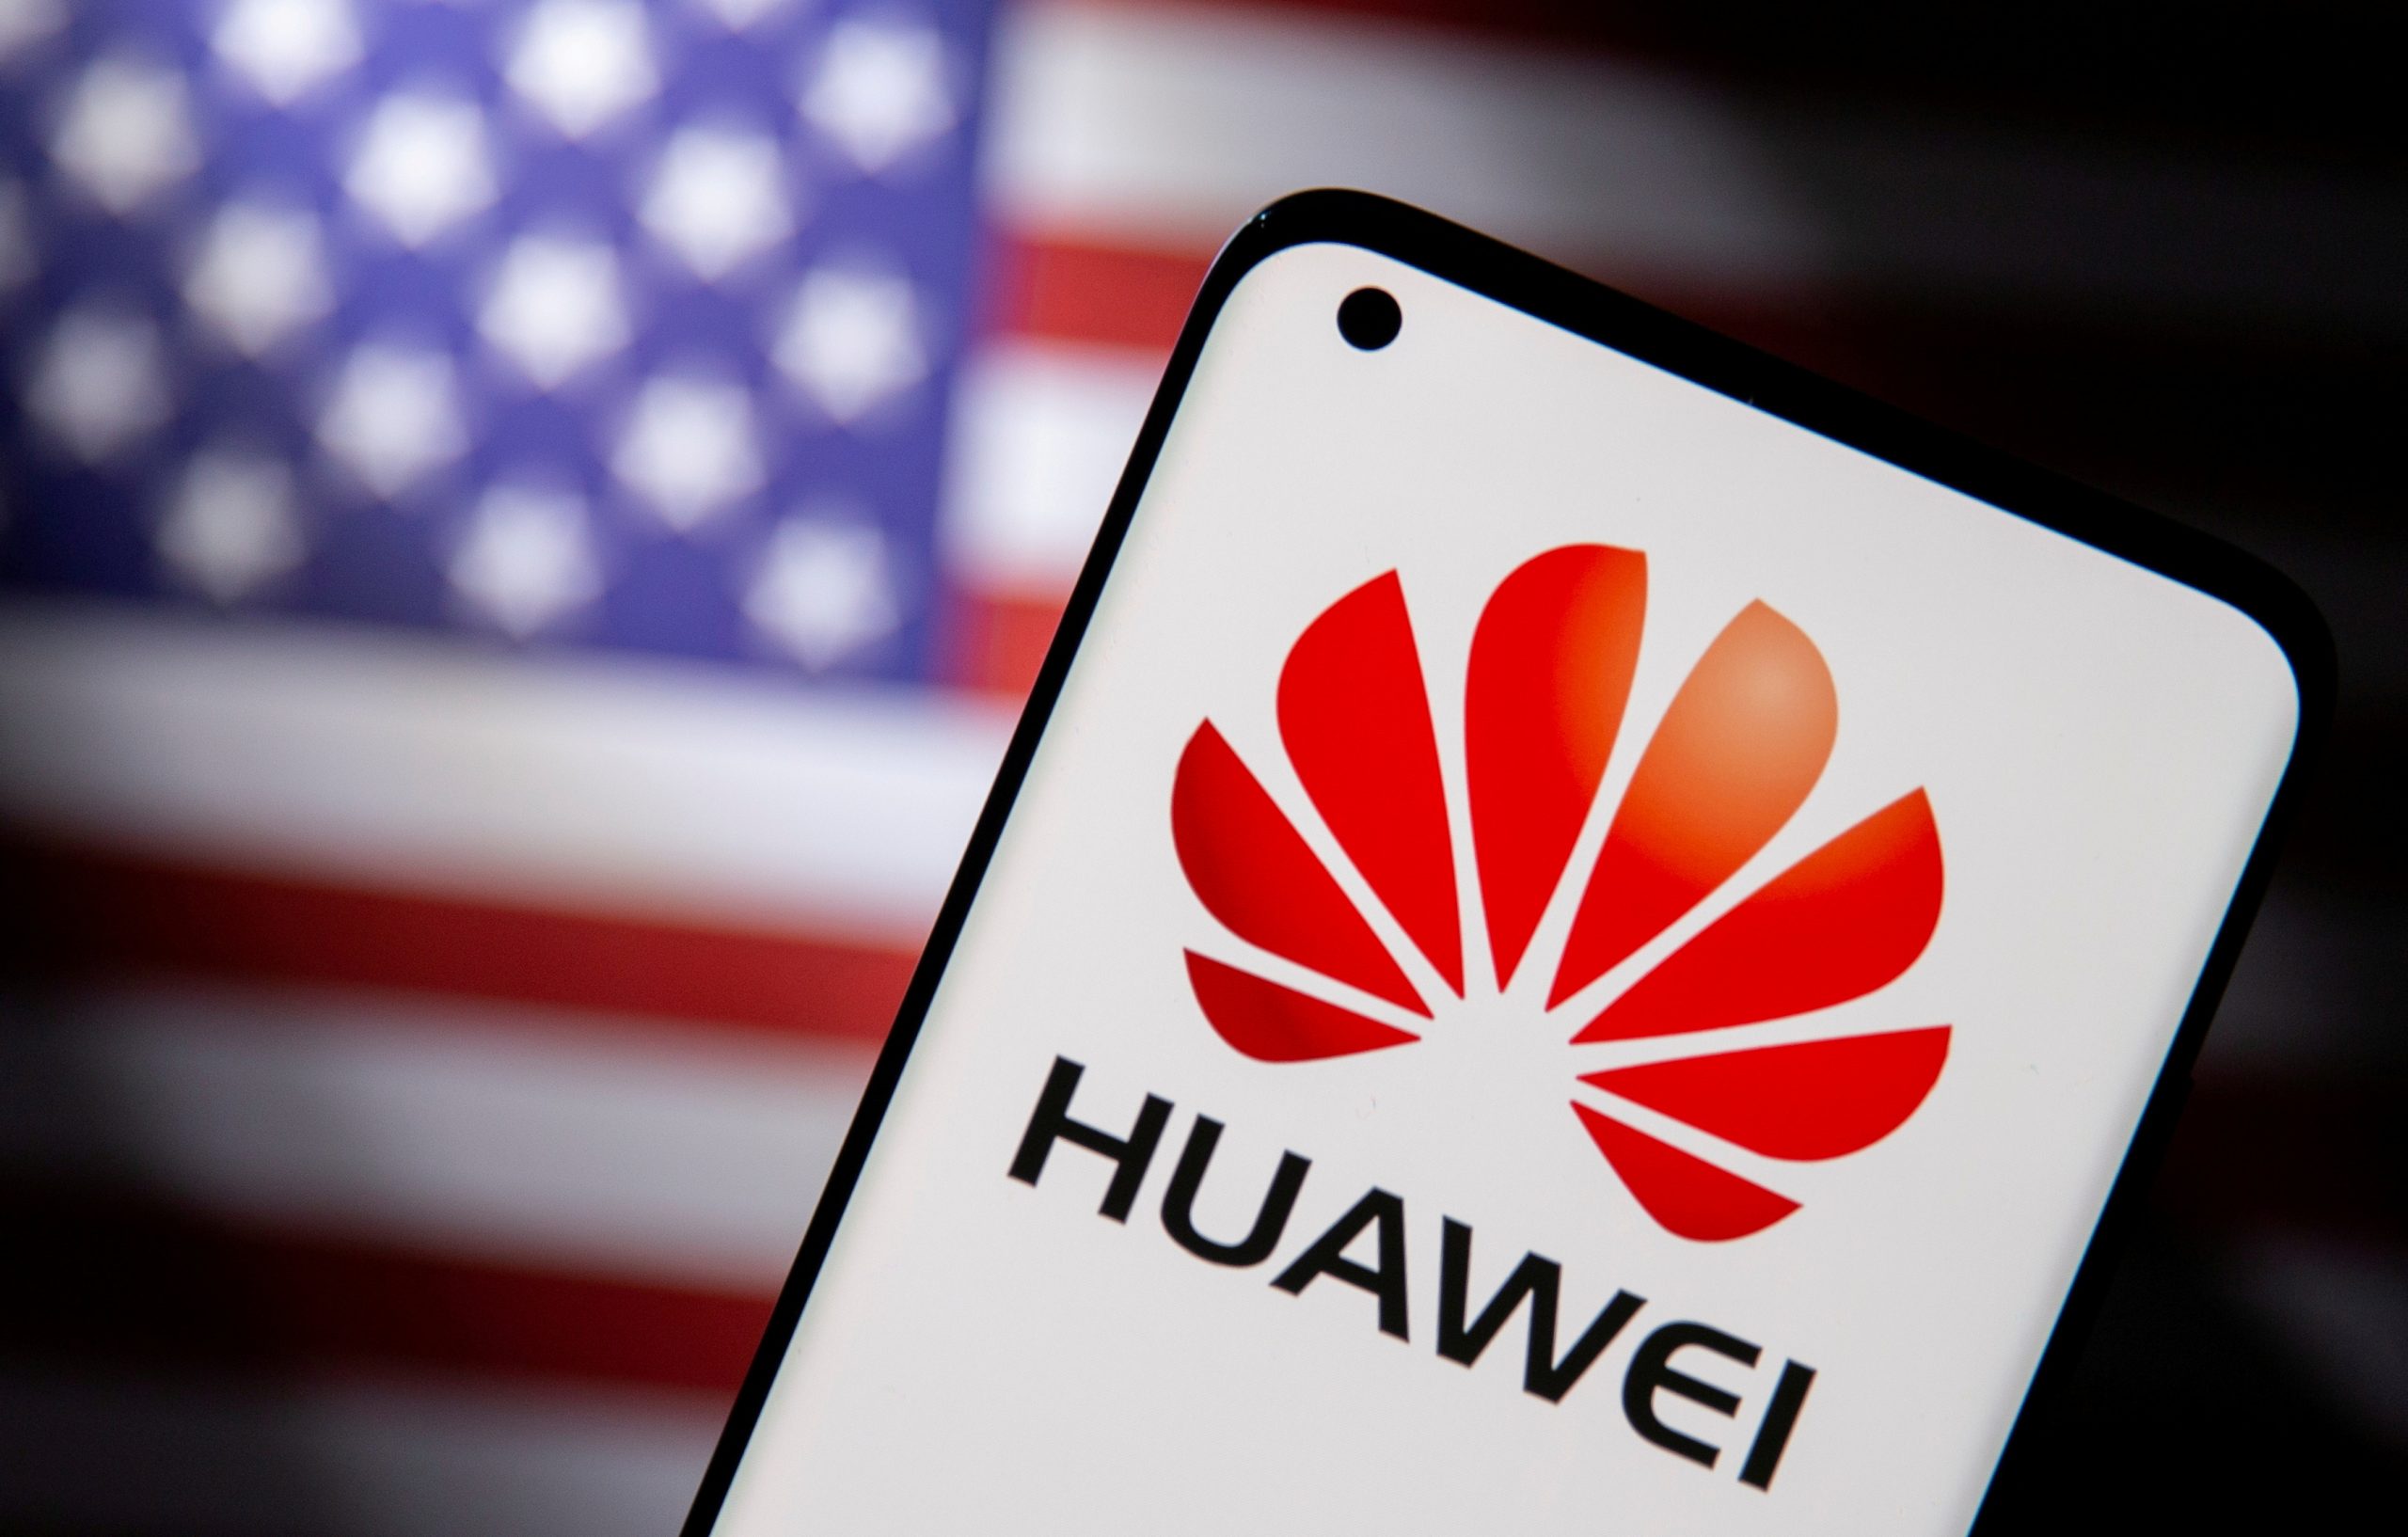 FILE PHOTO: Smartphone with a Huawei logo is seen in front of U.S. flag in this illustration